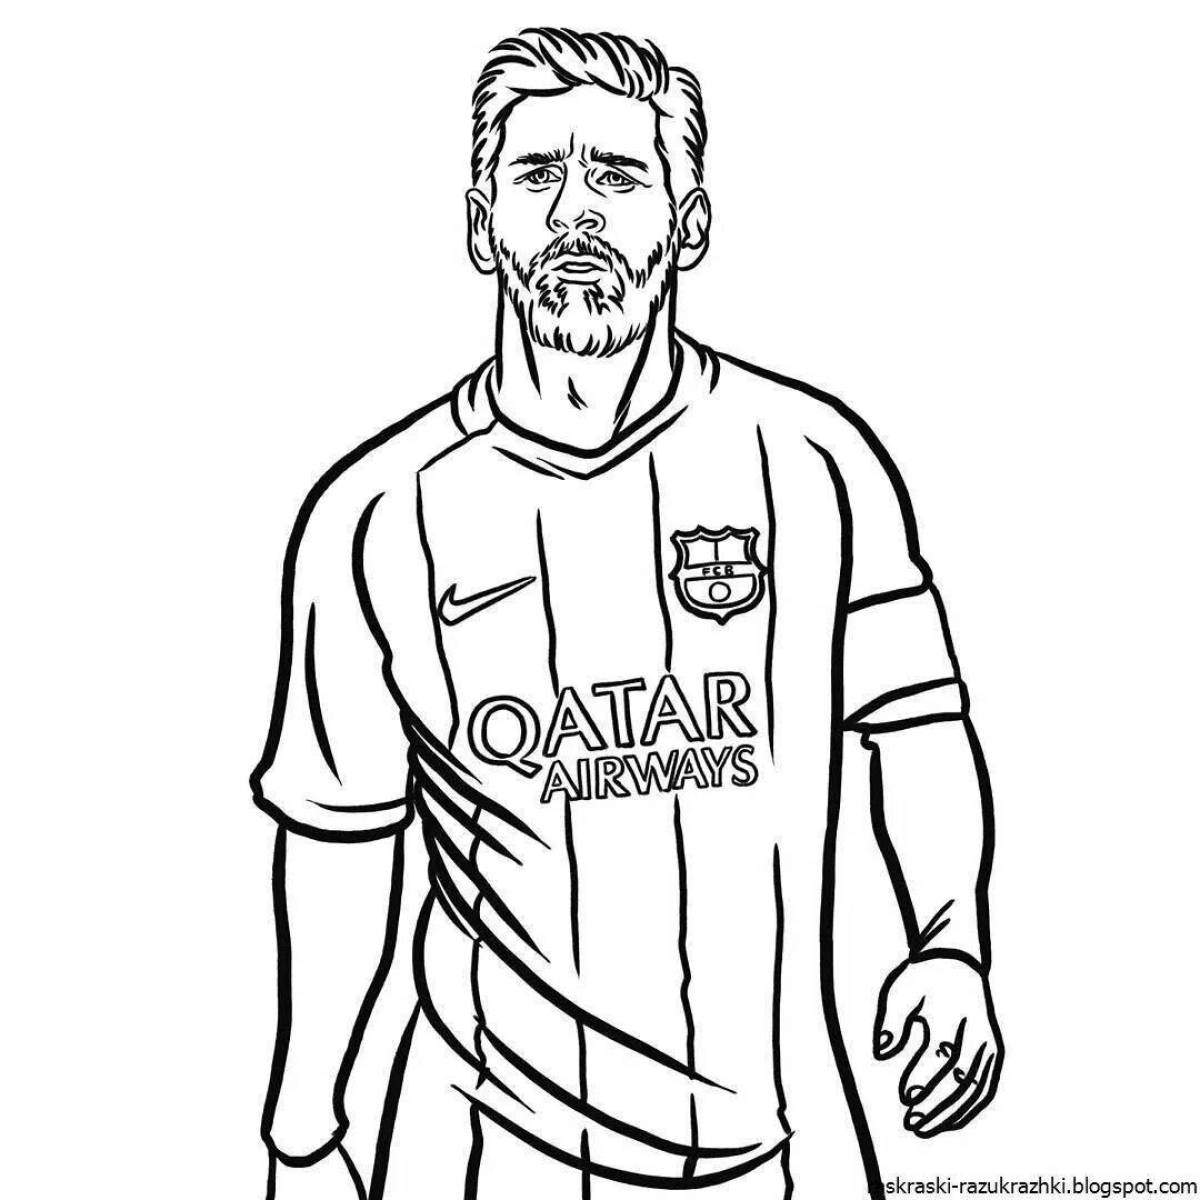 Charming psg soccer players coloring book